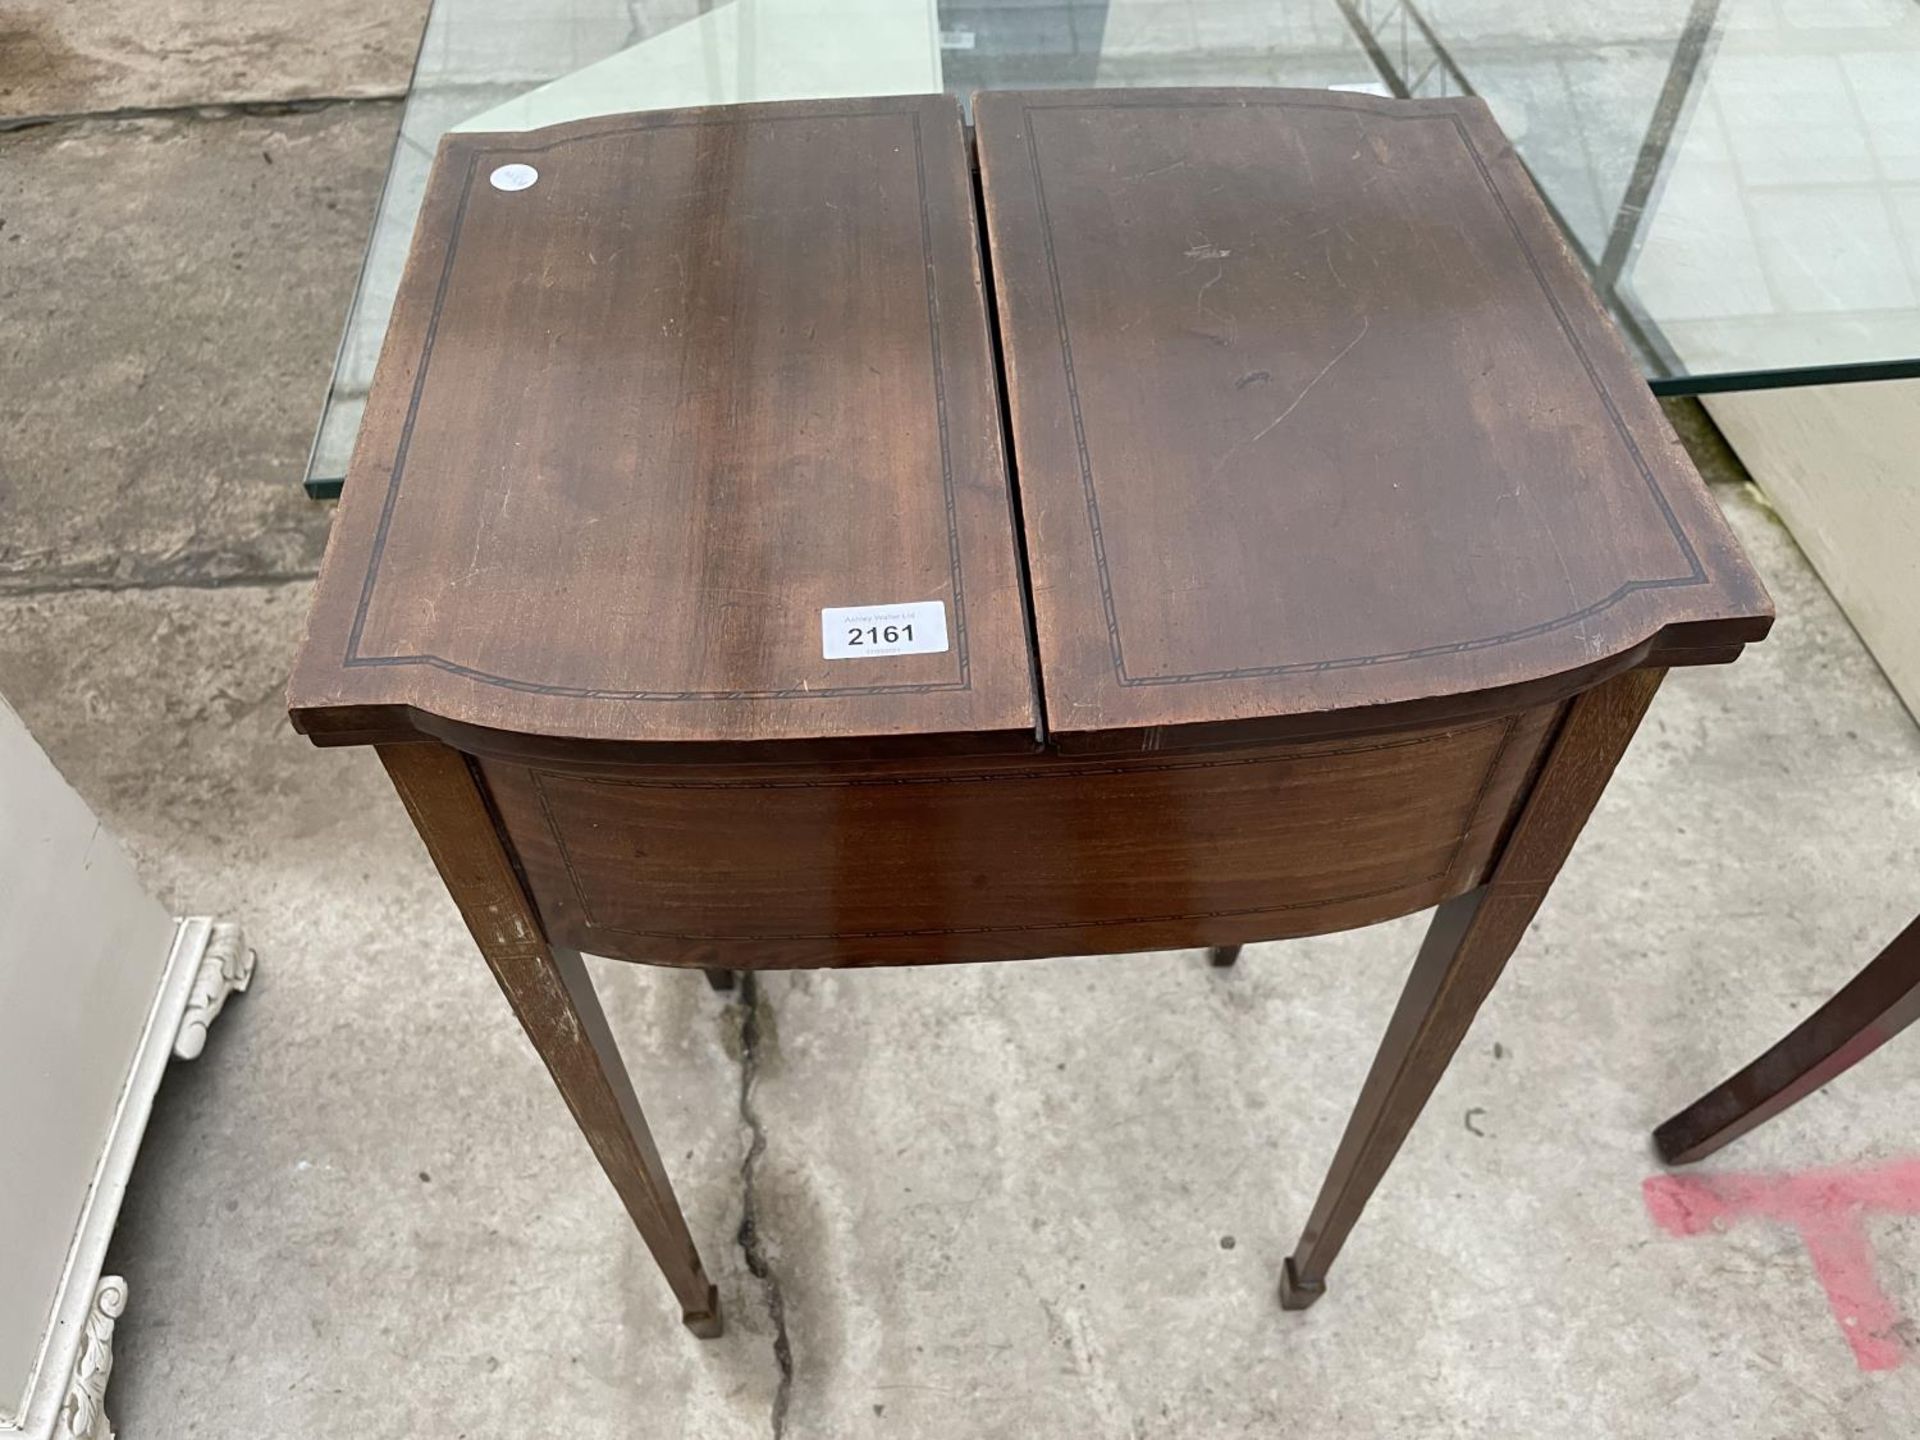 AN EDWARDIAN MAHOGANY AND INLAID SEWING BOX/TABLE WITH FOLD-OVER TOP, ON TAPERED LEGS WITH SPADE